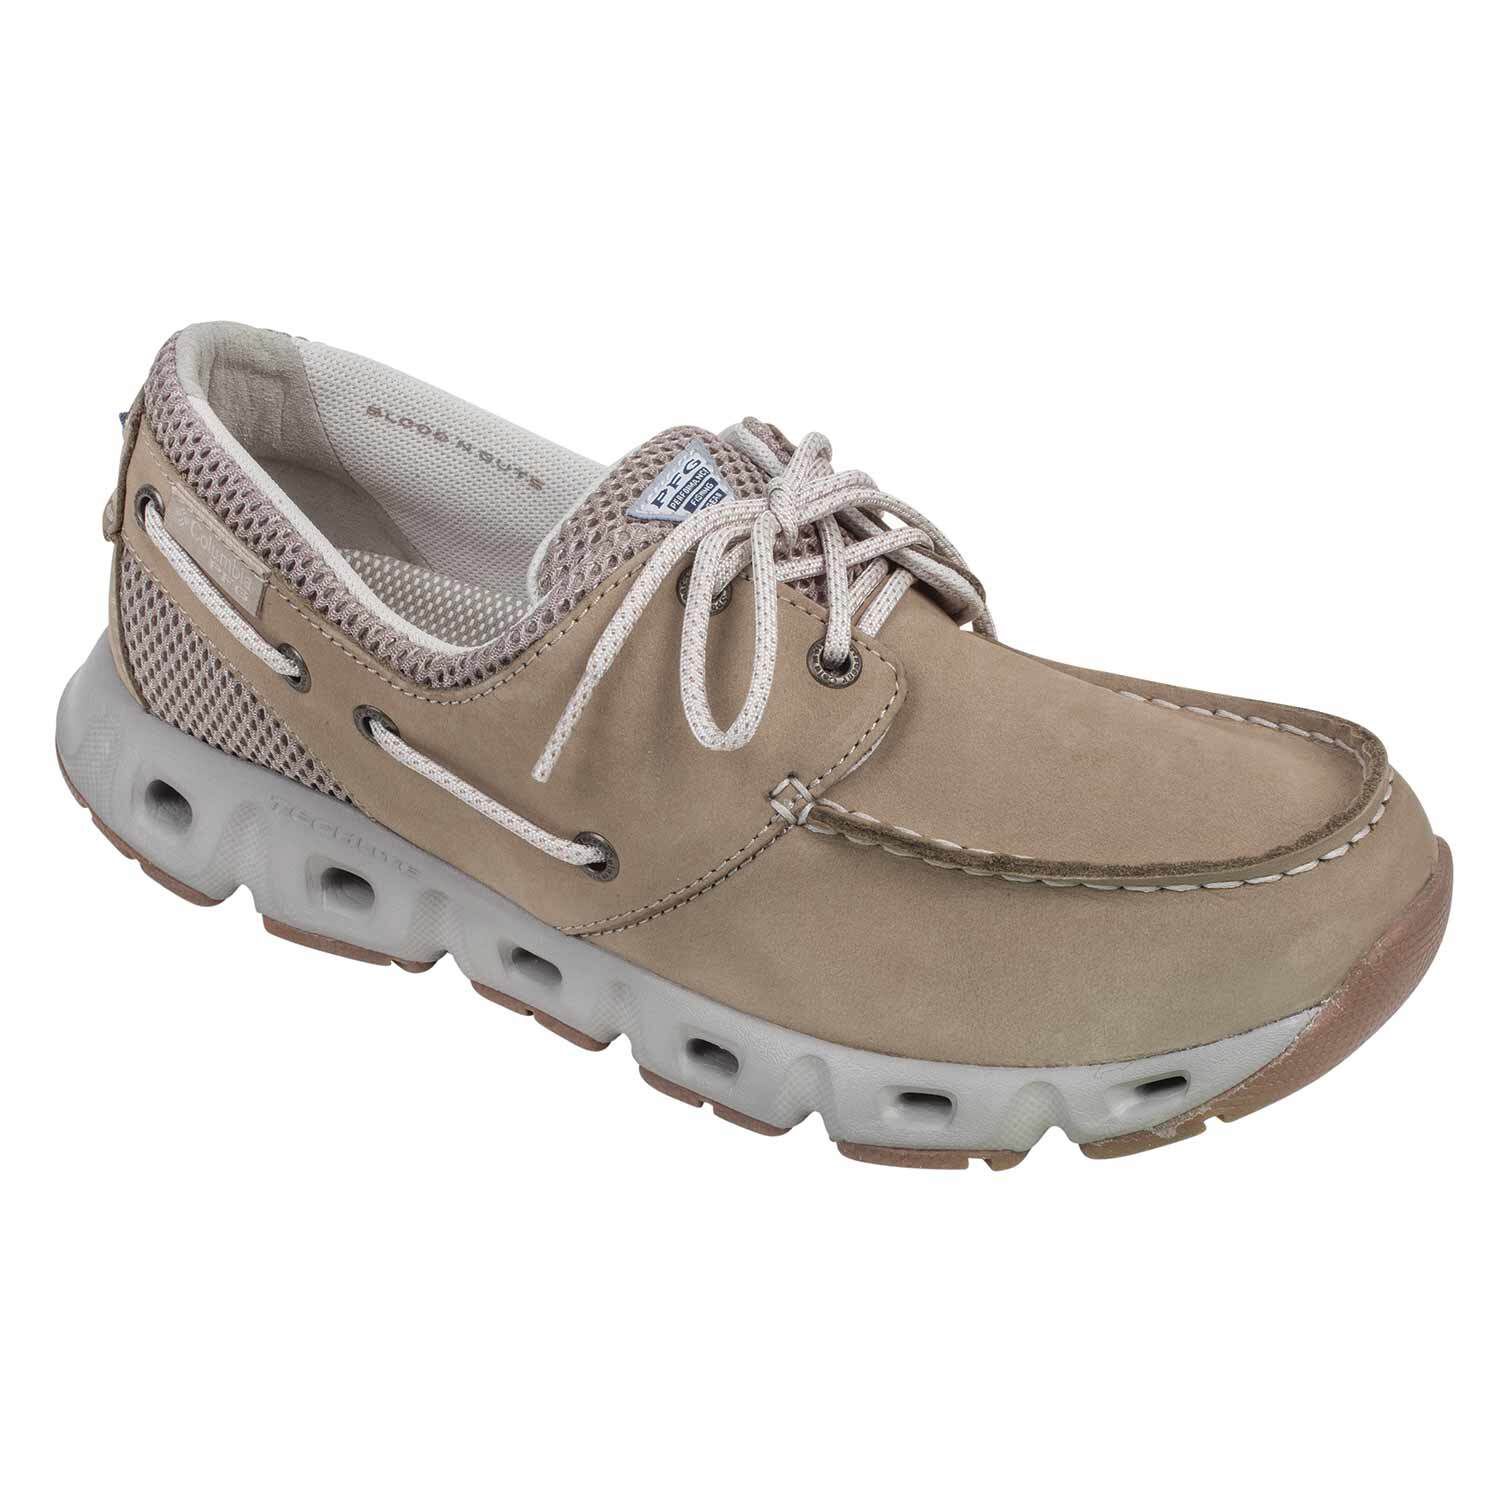 New Mens Columbia "Boatdrainer" Leather PFG Techlite Water Boat Shoes 